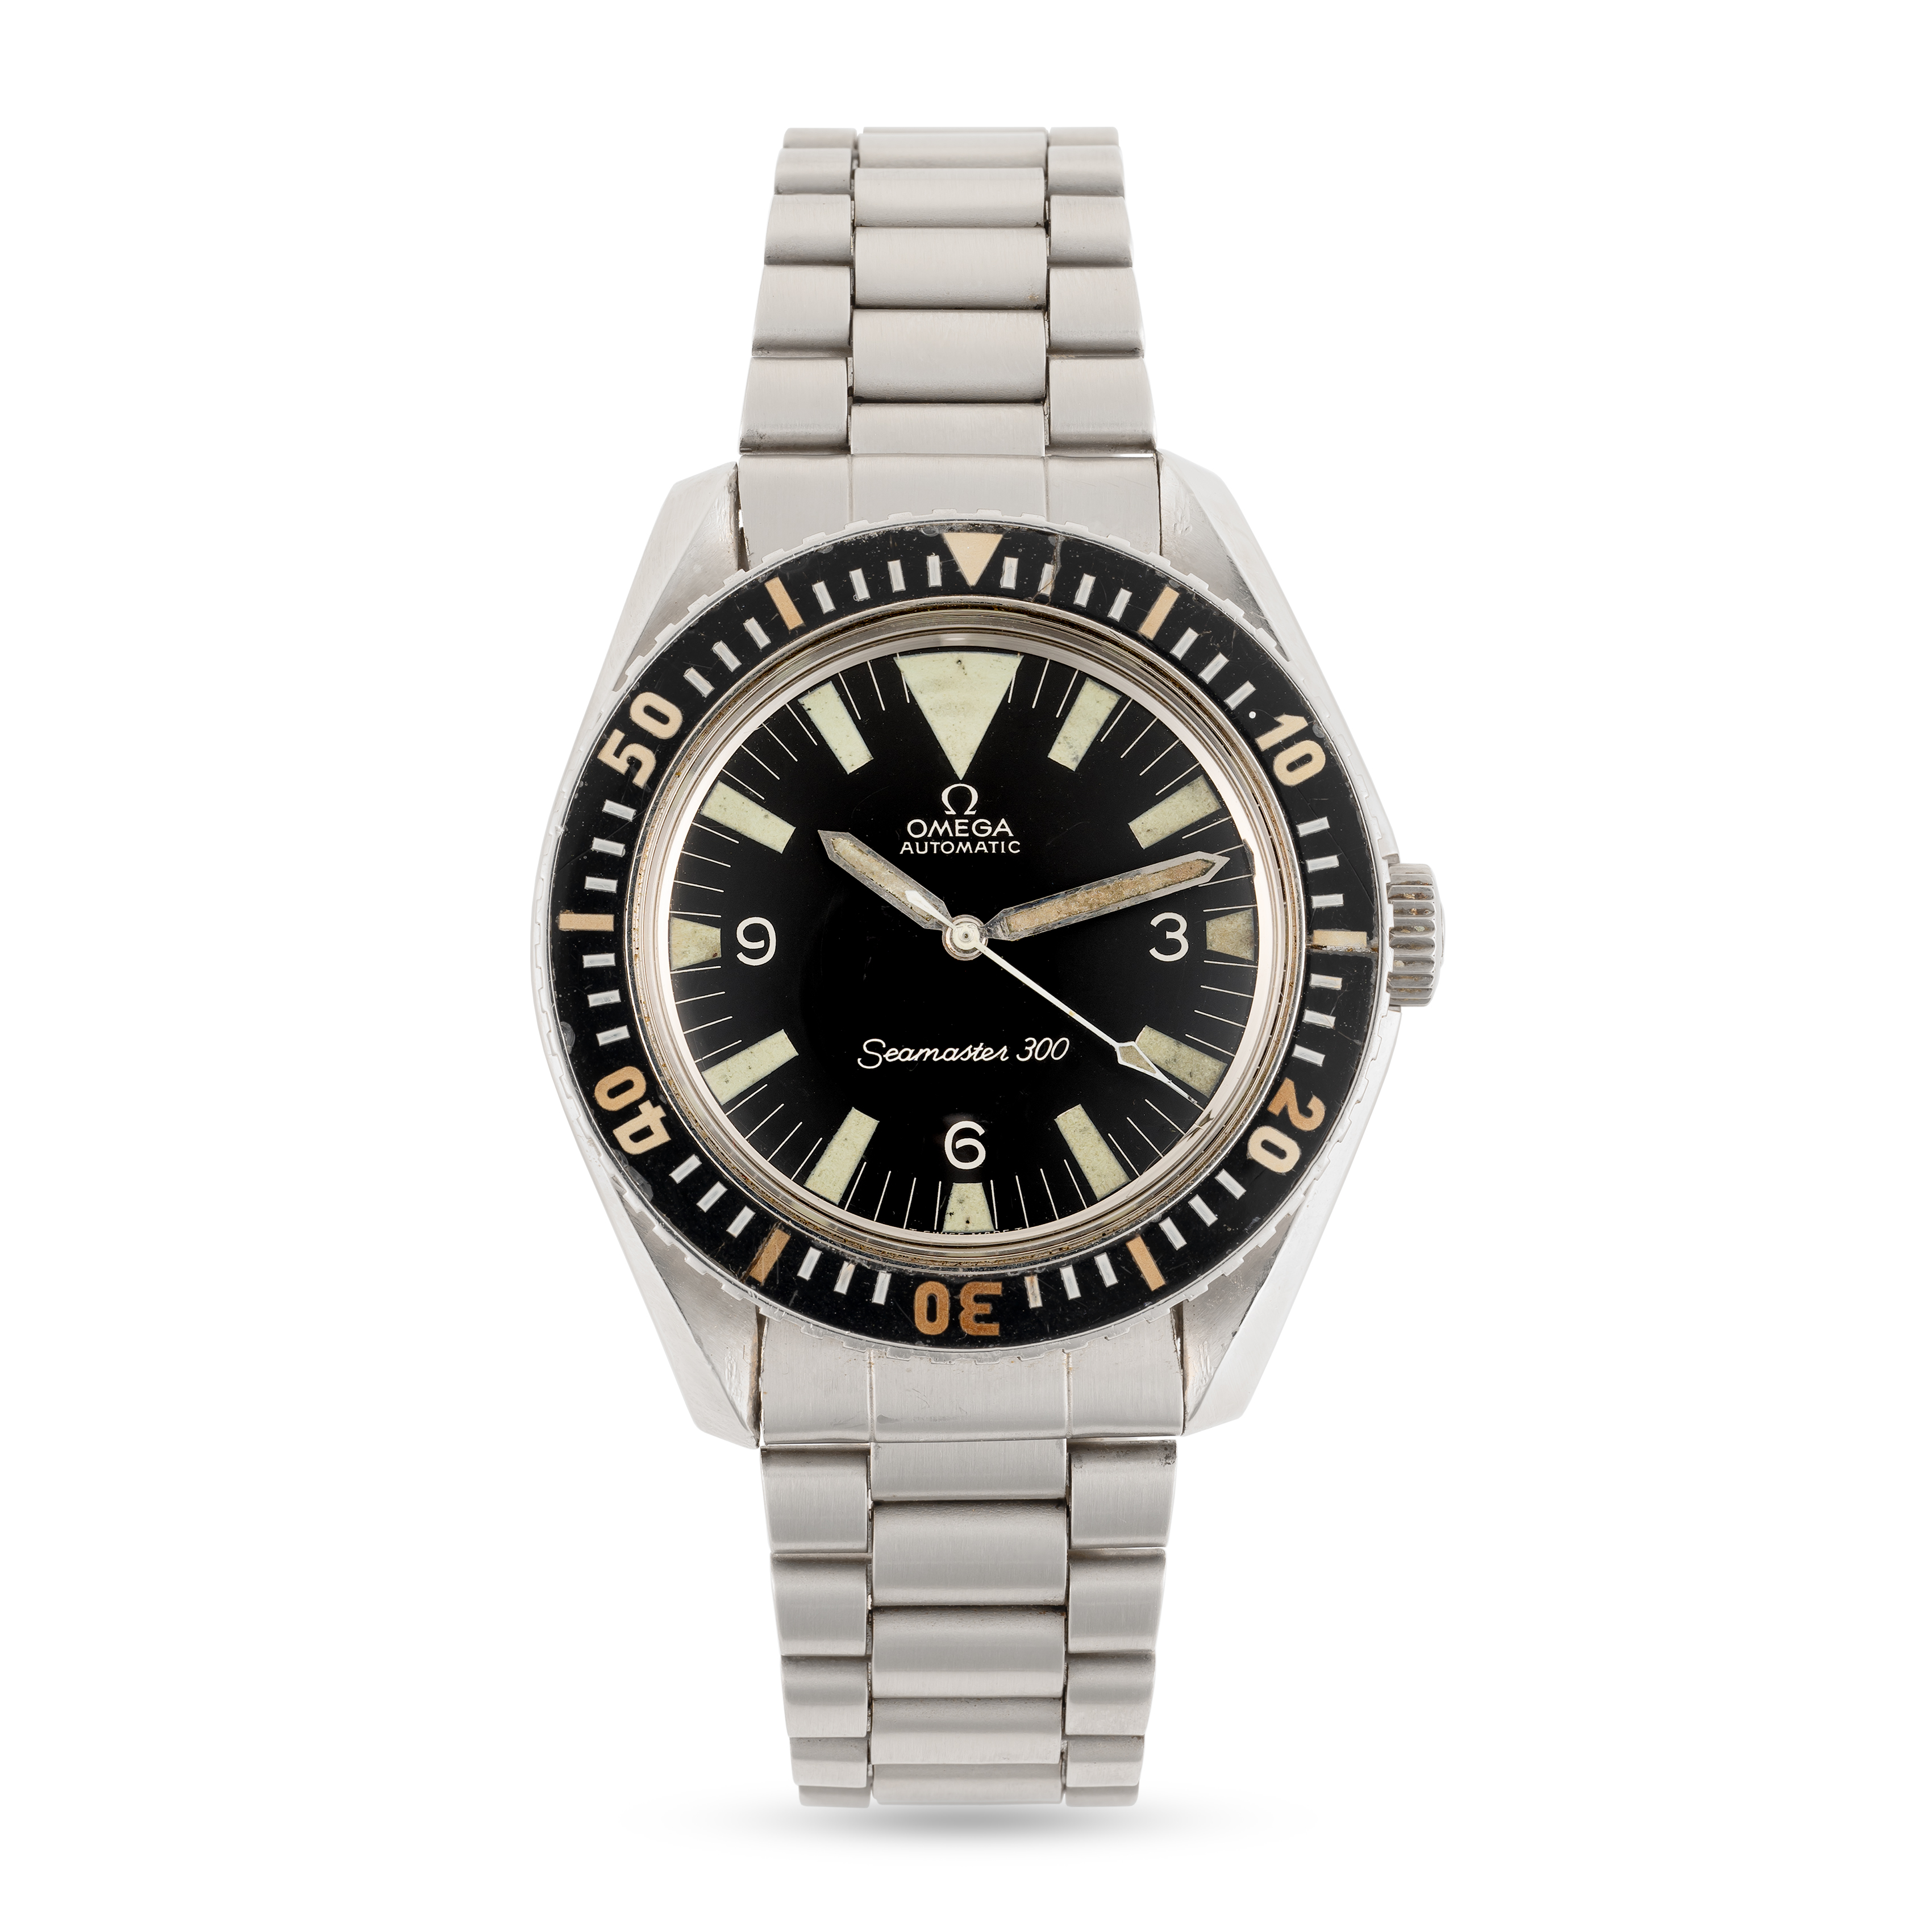 A GENTLEMAN'S SIZE STAINLESS STEEL OMEGA SEAMASTER 300 DIVERS BRACELET WATCH CIRCA 1965, REF. 165. - Image 2 of 10